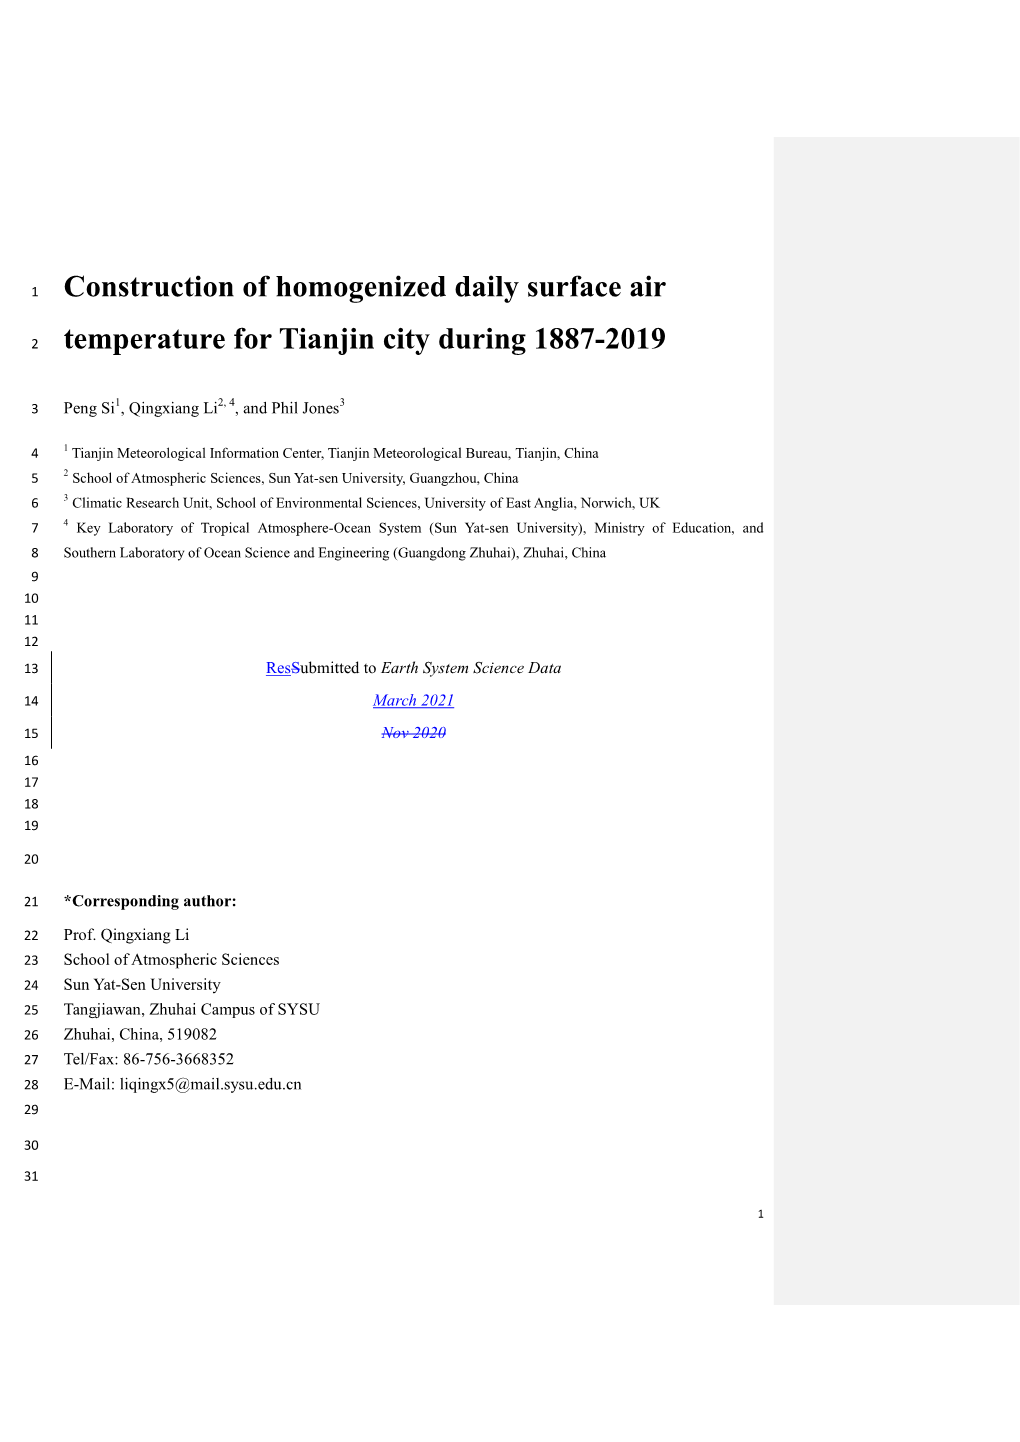 Construction of Homogenized Daily Surface Air Temperature for Tianjin City During 1887-2019